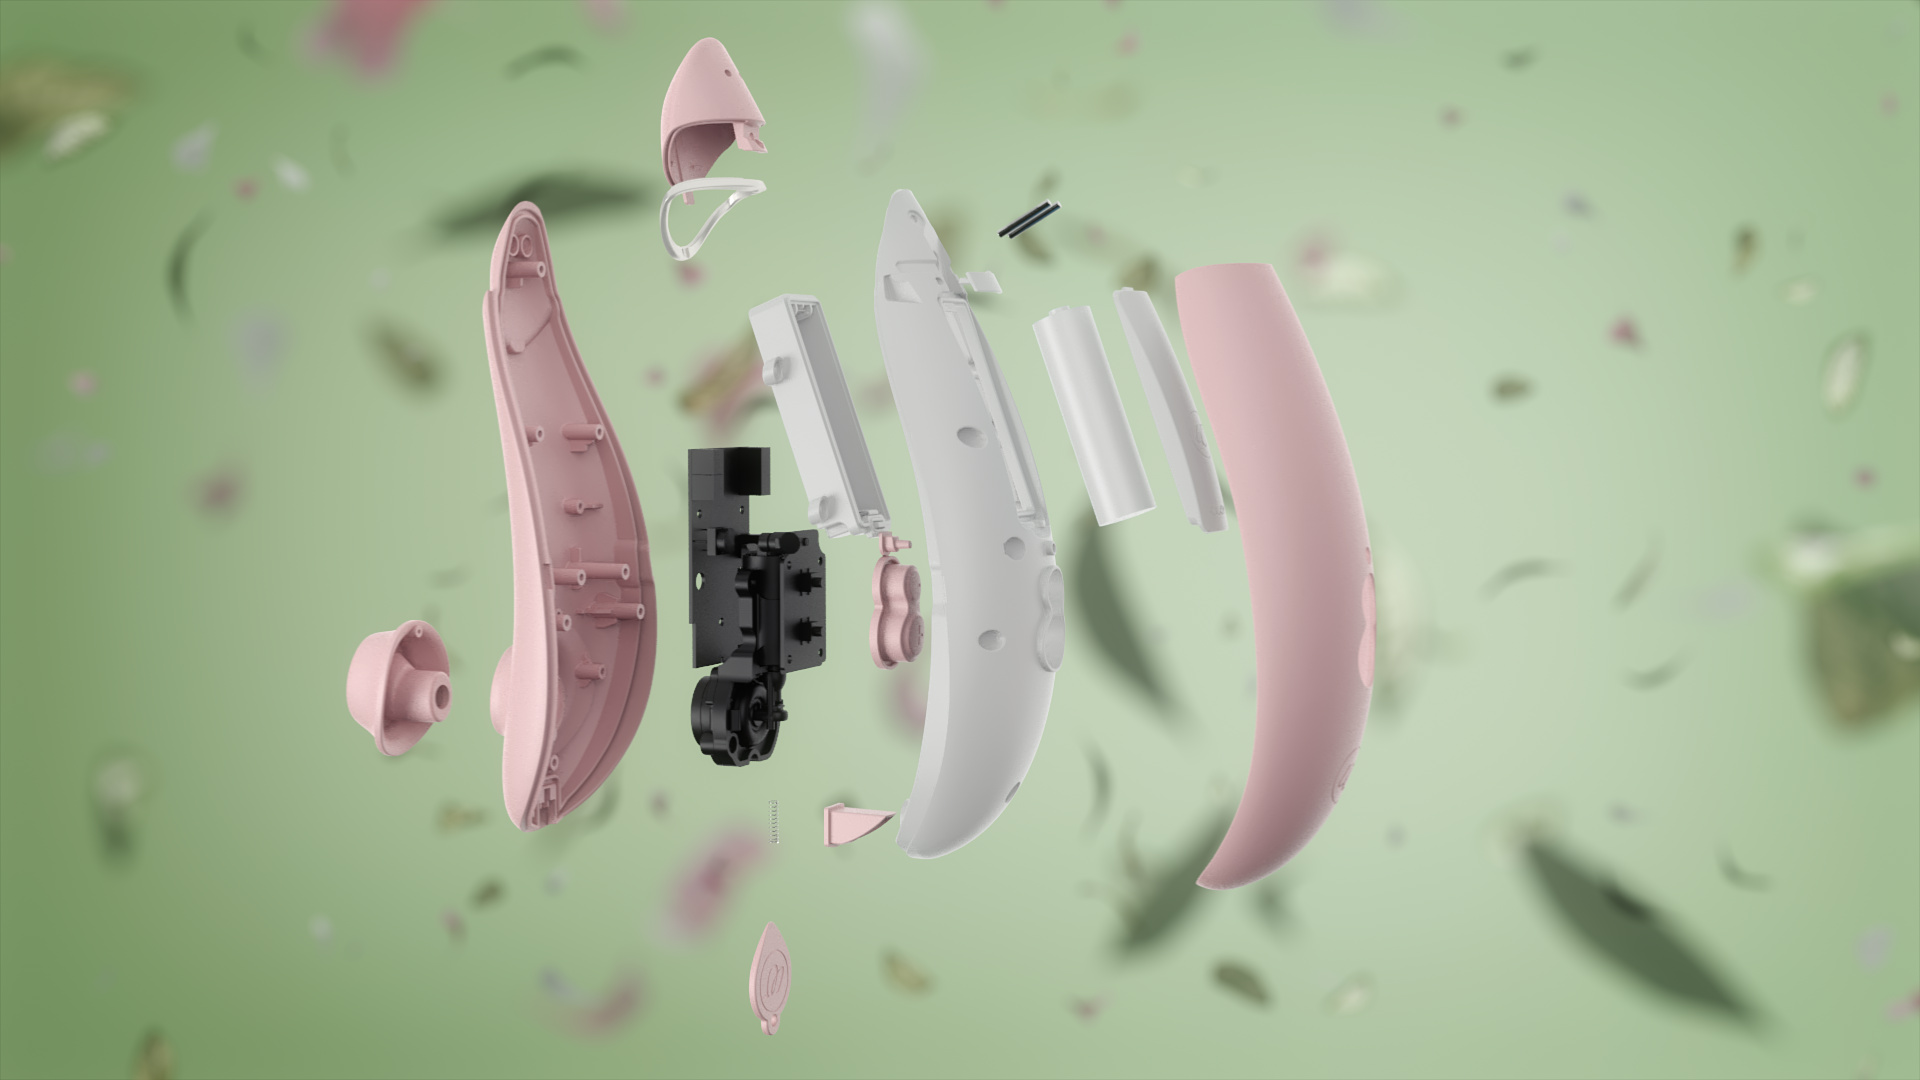 LSN News A biodegradable sex toy promising sustainable pleasure